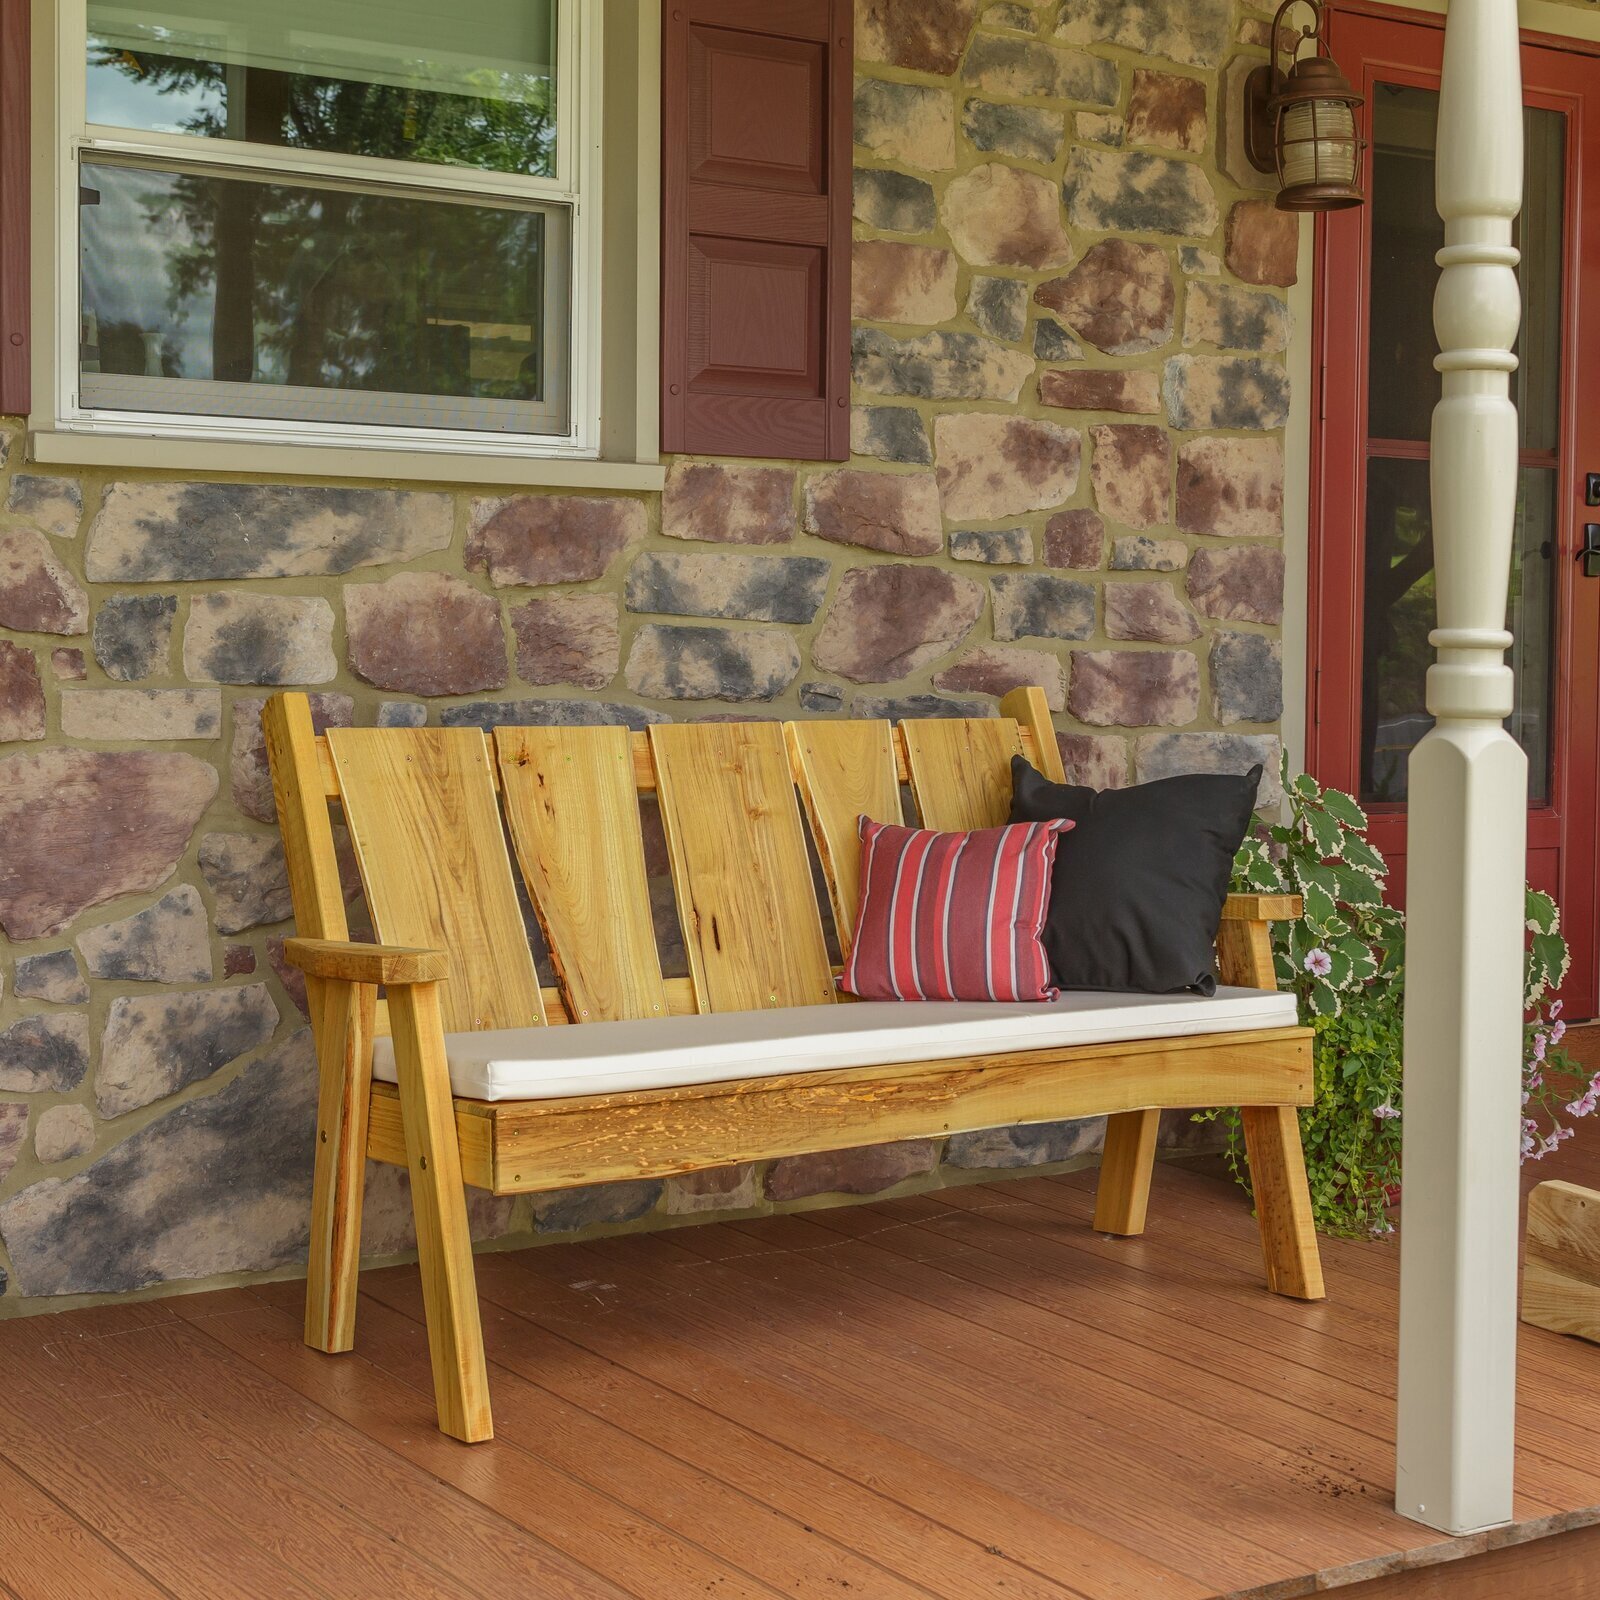 Rustic Wooden Bench For The Perfect Patio Piece 